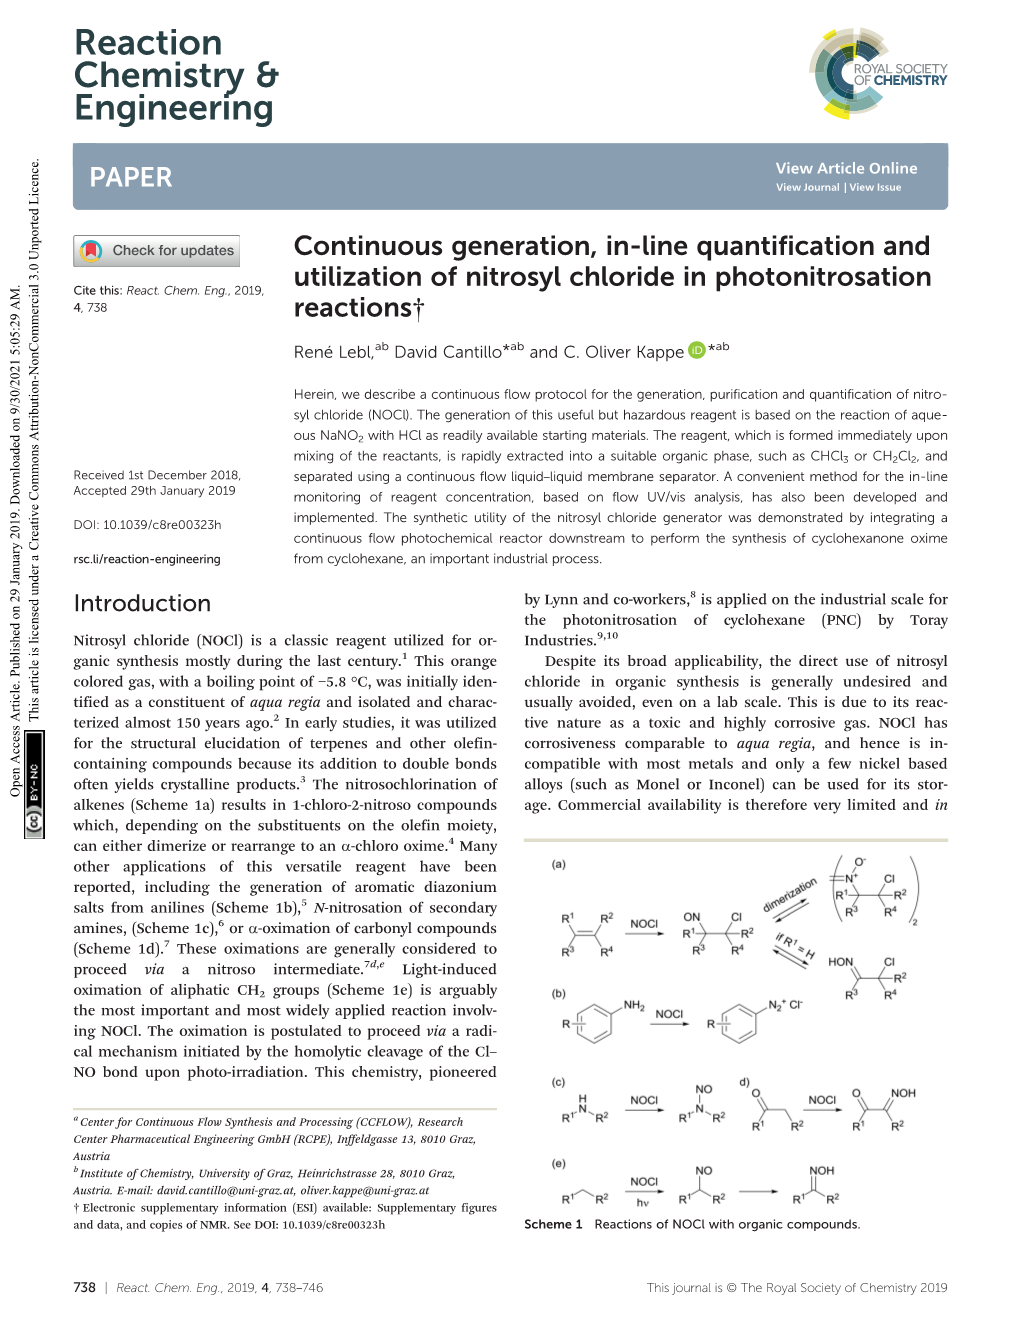 Continuous Generation, In-Line Quantification and Utilization Of